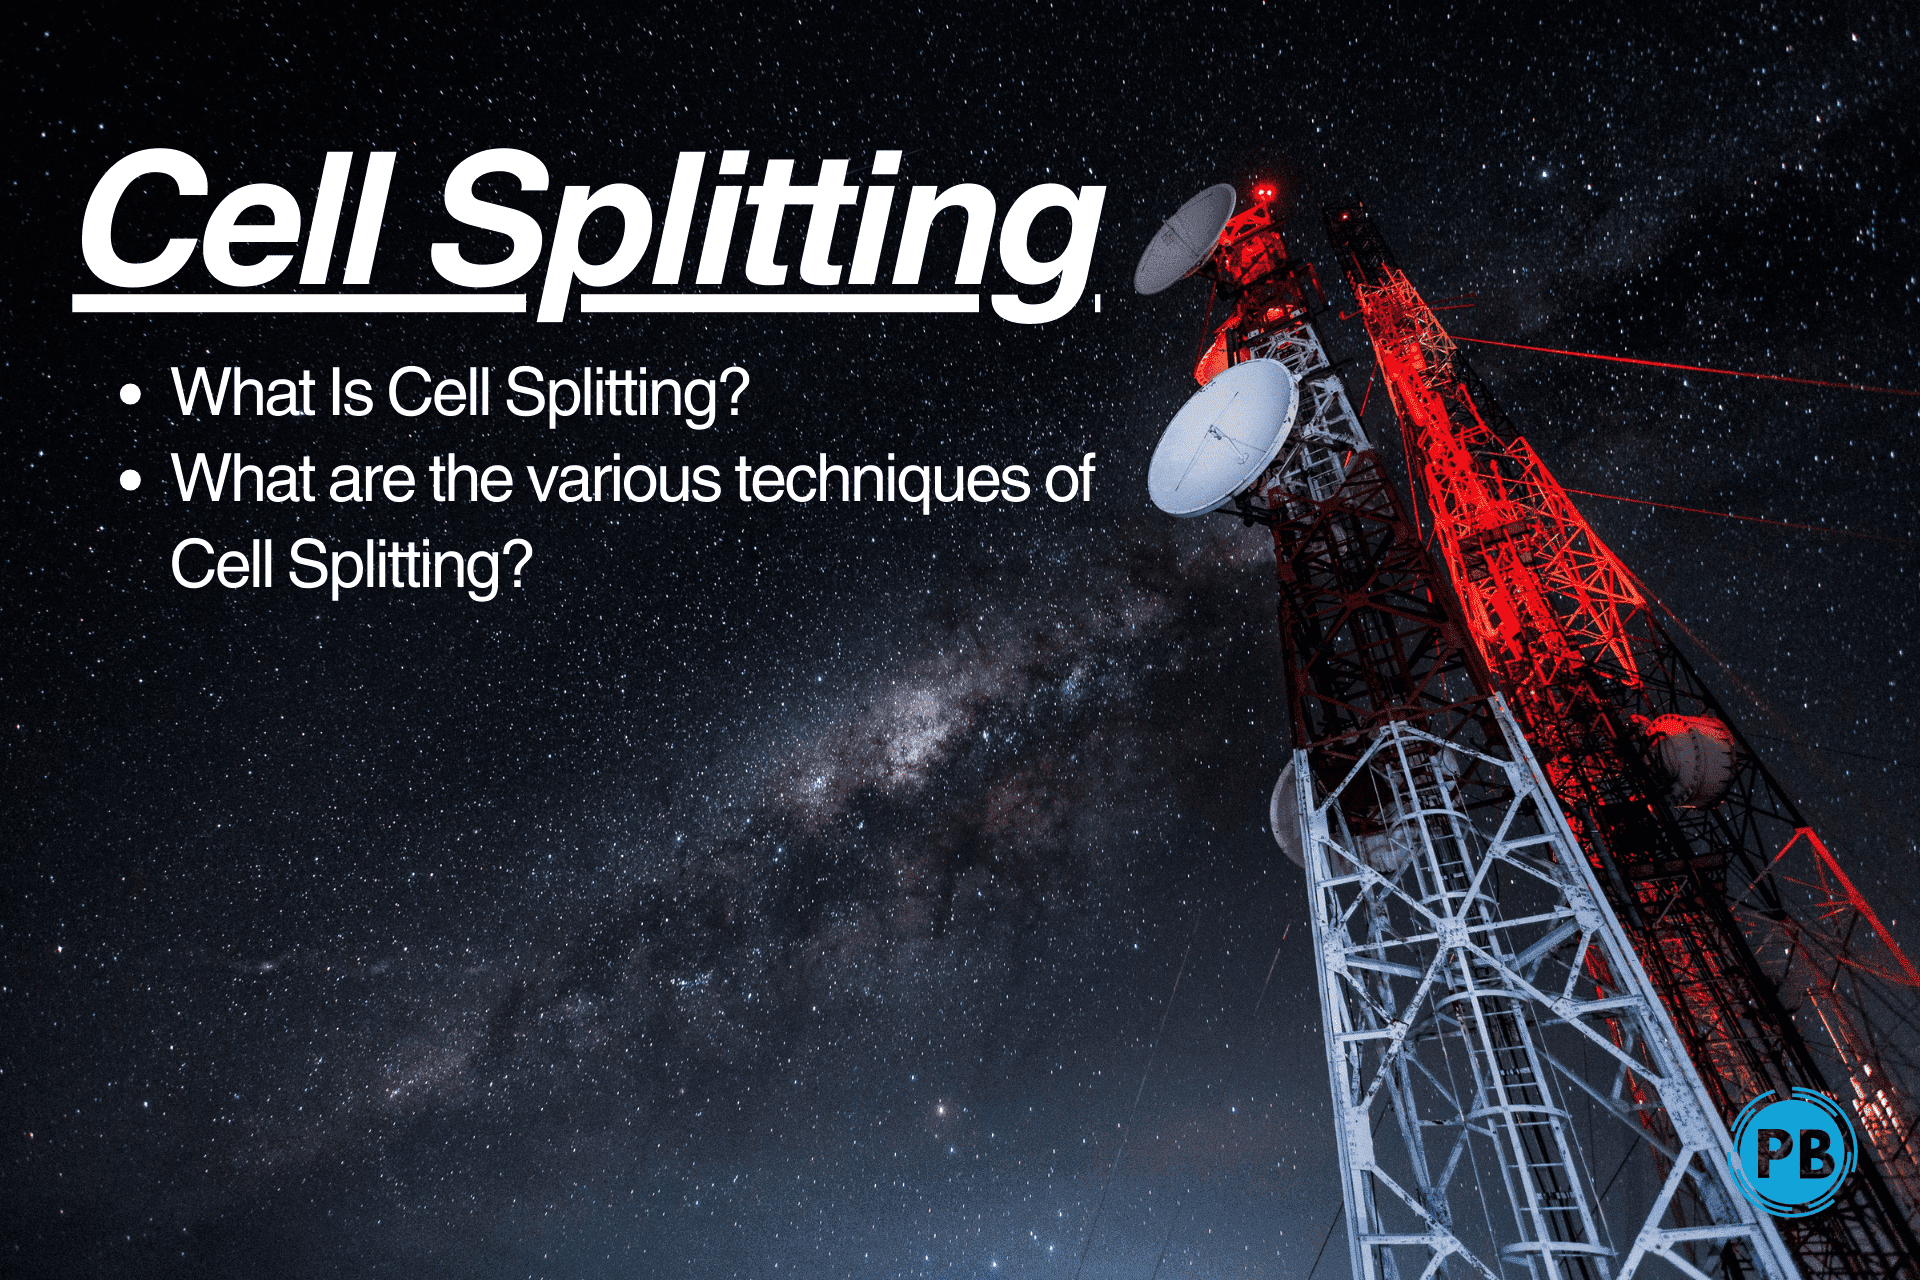 What is Cell Splitting and its various techniques? details